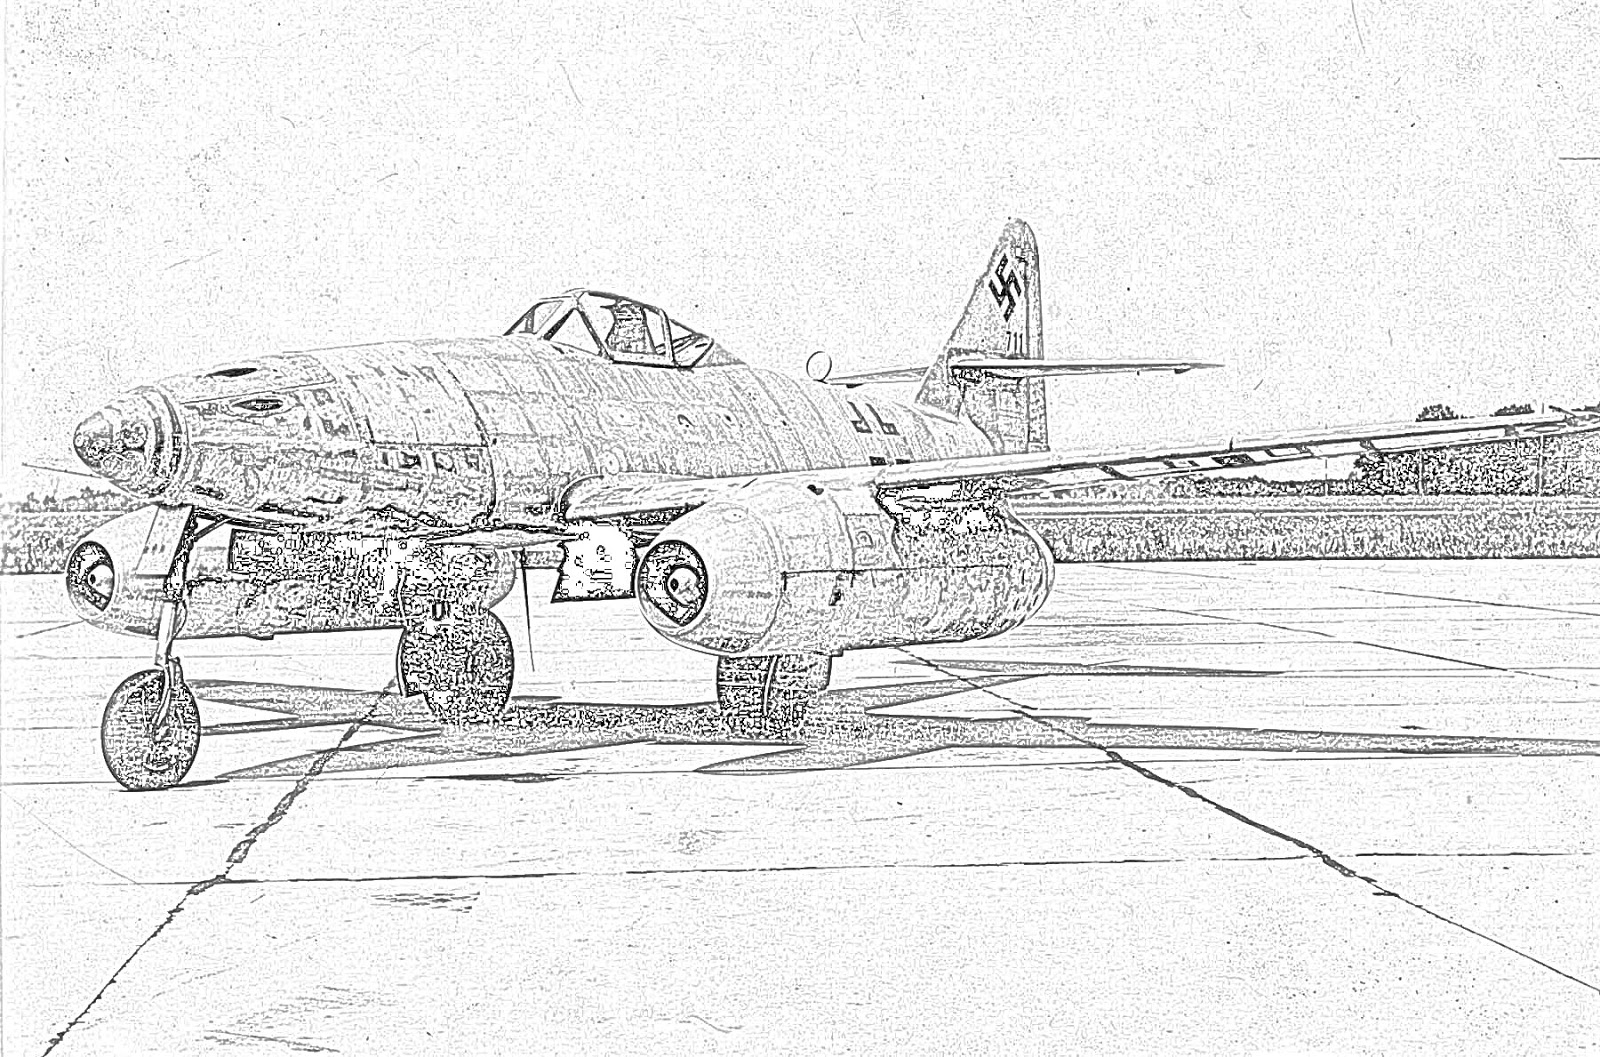 93  Coloring Pages Fighter Jets  Best Free